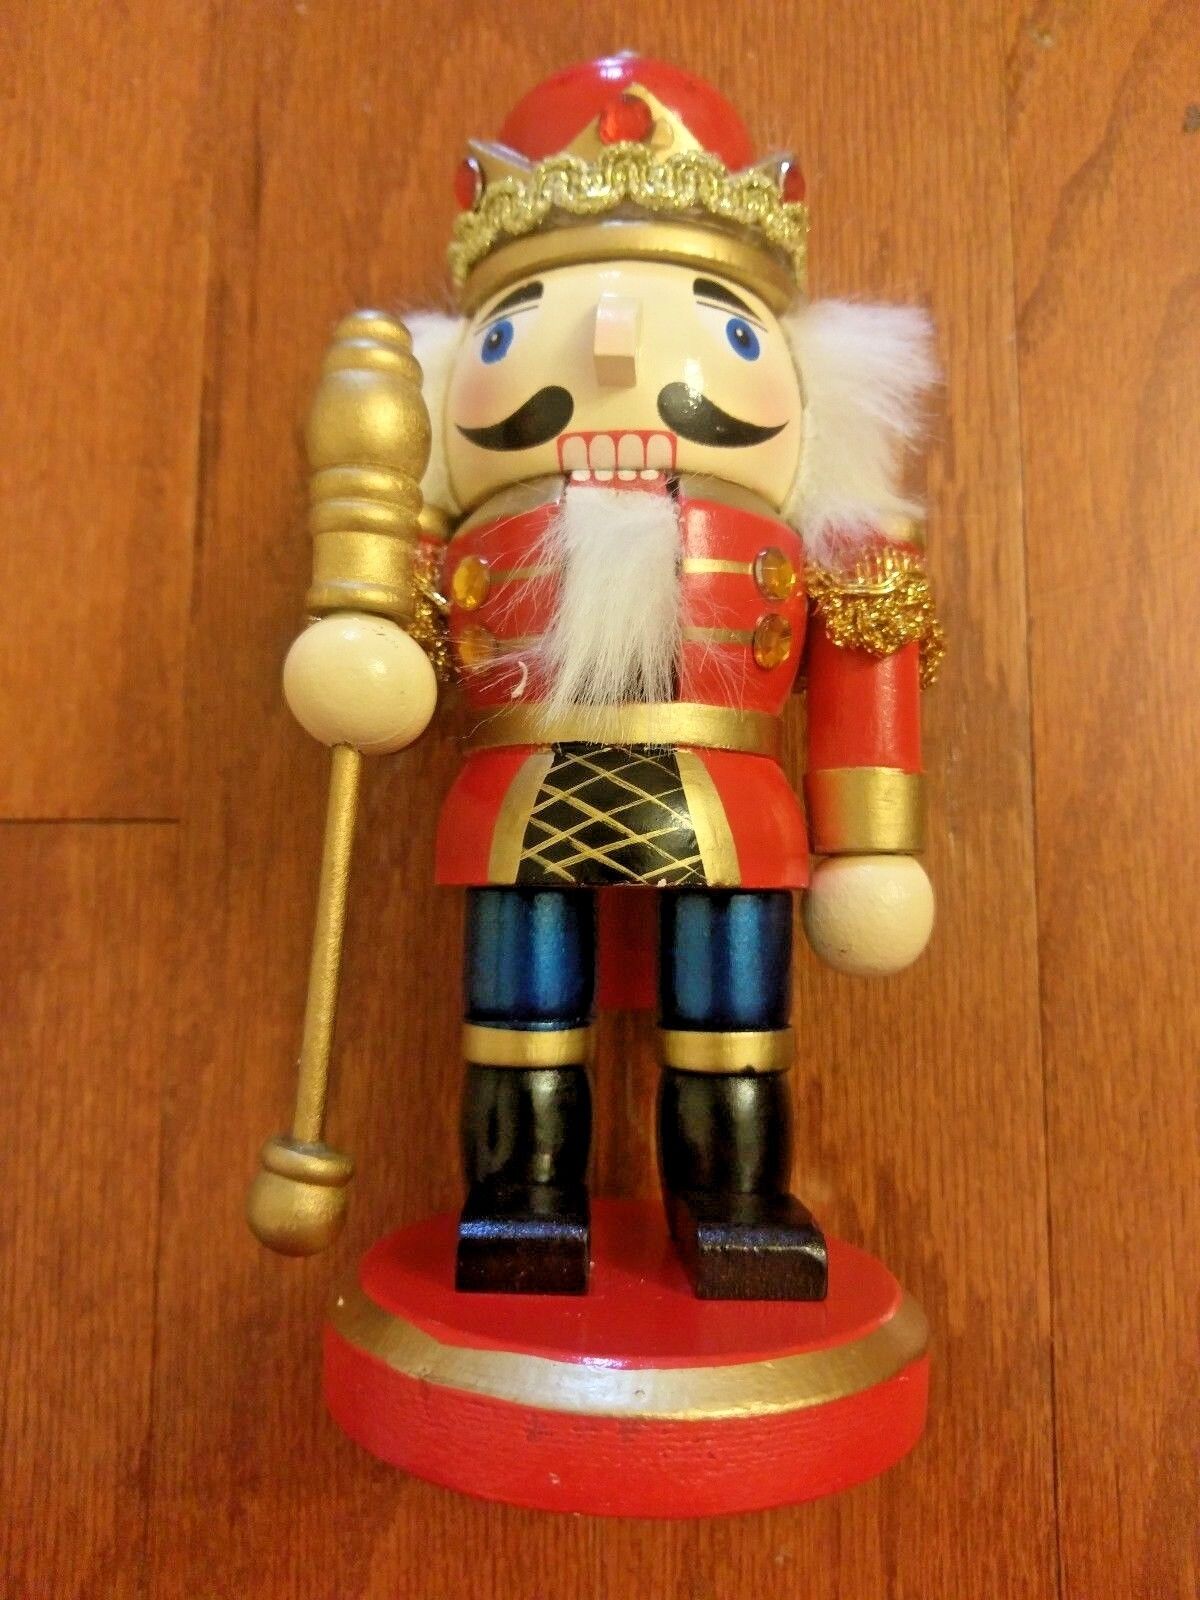 SMALL ROYAL KING NUTCRACKER WITH RED OUTFIT AND GOLD CROWN WITH JEWELS (8” TALL)